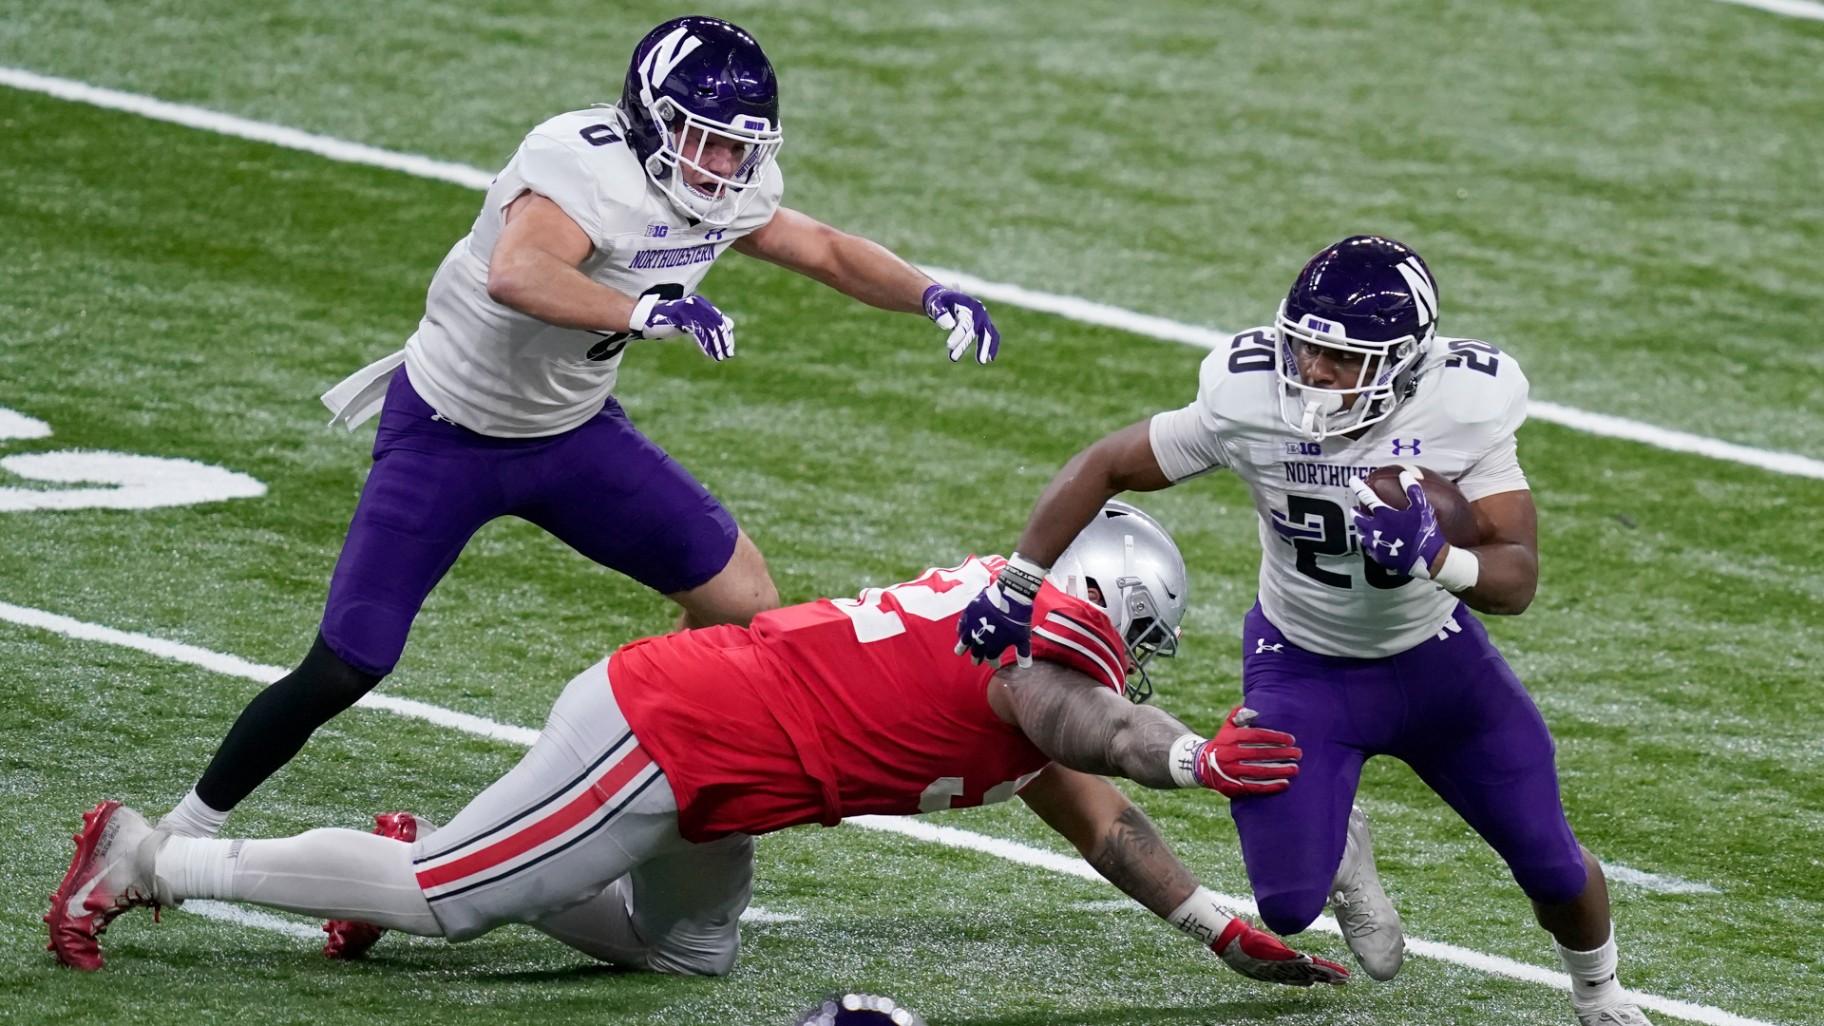 Northwestern running back Cam Porter (20) runs with the ball as Ohio State defensive tackle Haskell Garrett defends and teammate John Raine (0) watches during the first half of the Big Ten championship NCAA college football game, Saturday, Dec. 19, 2020, in Indianapolis. (AP Photo / Darron Cummings, File)